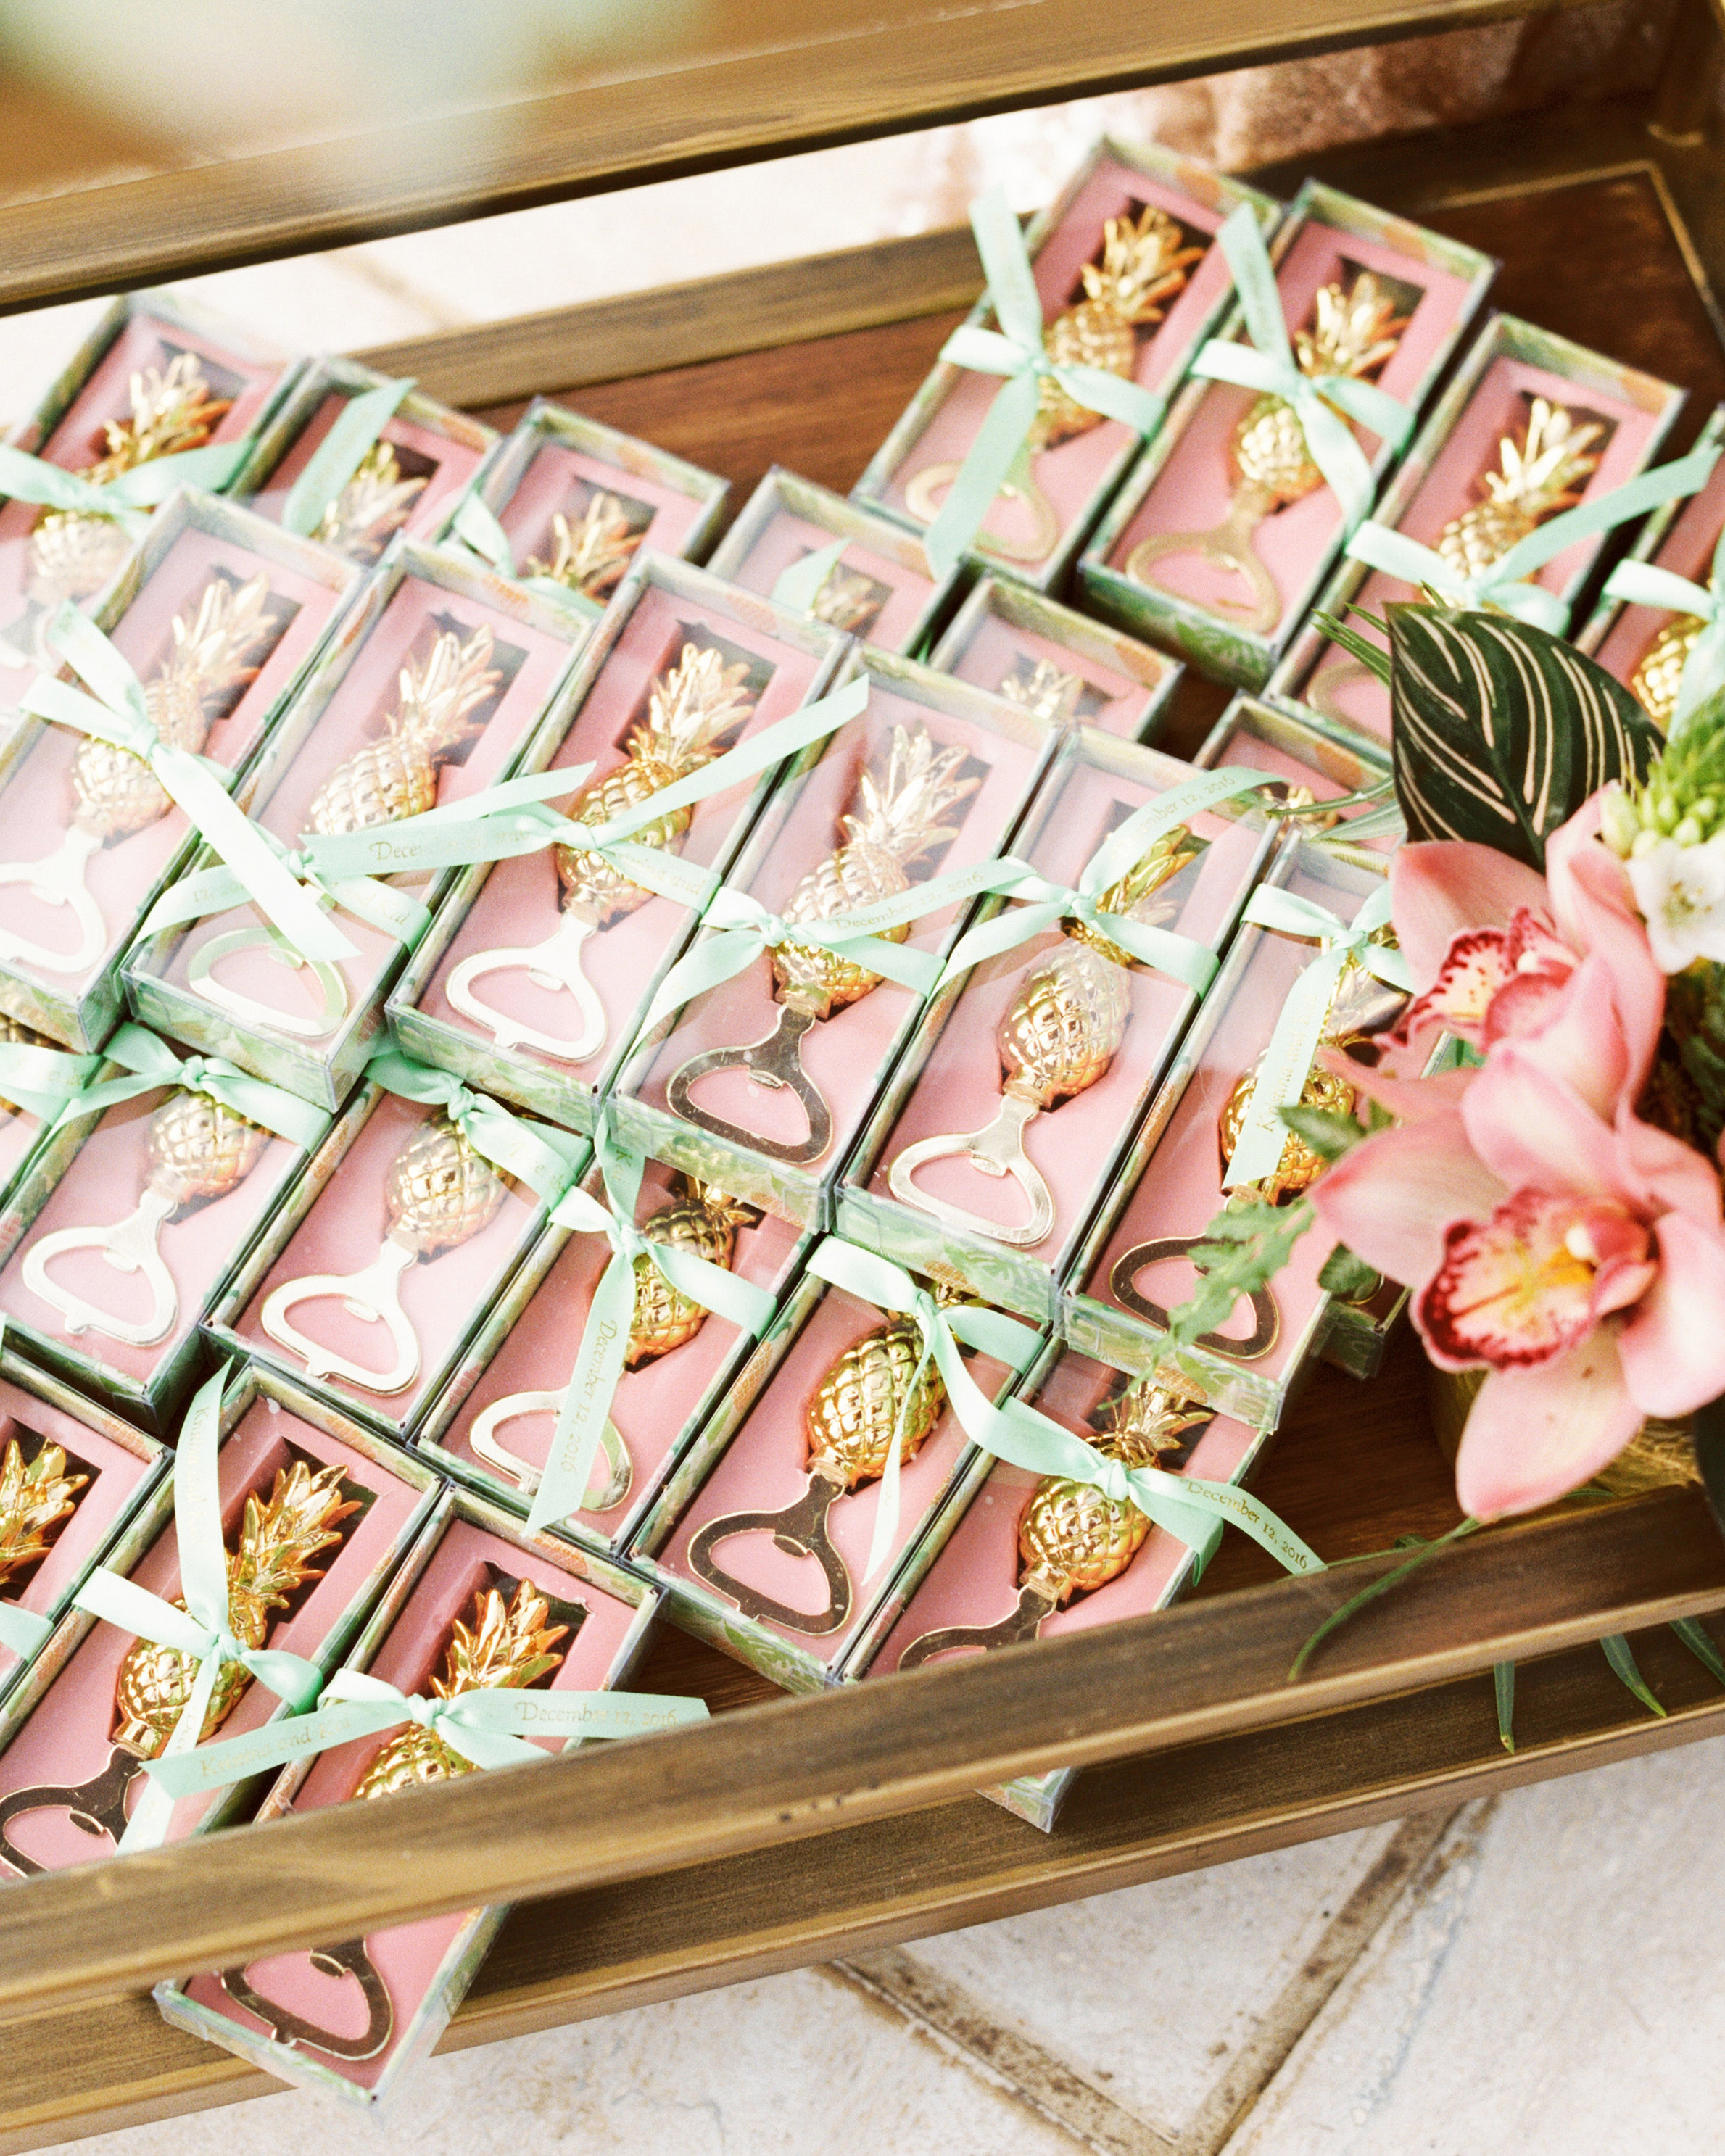 50 Creative Wedding Favors That Will Delight Your Guests | Martha Stewart Weddings